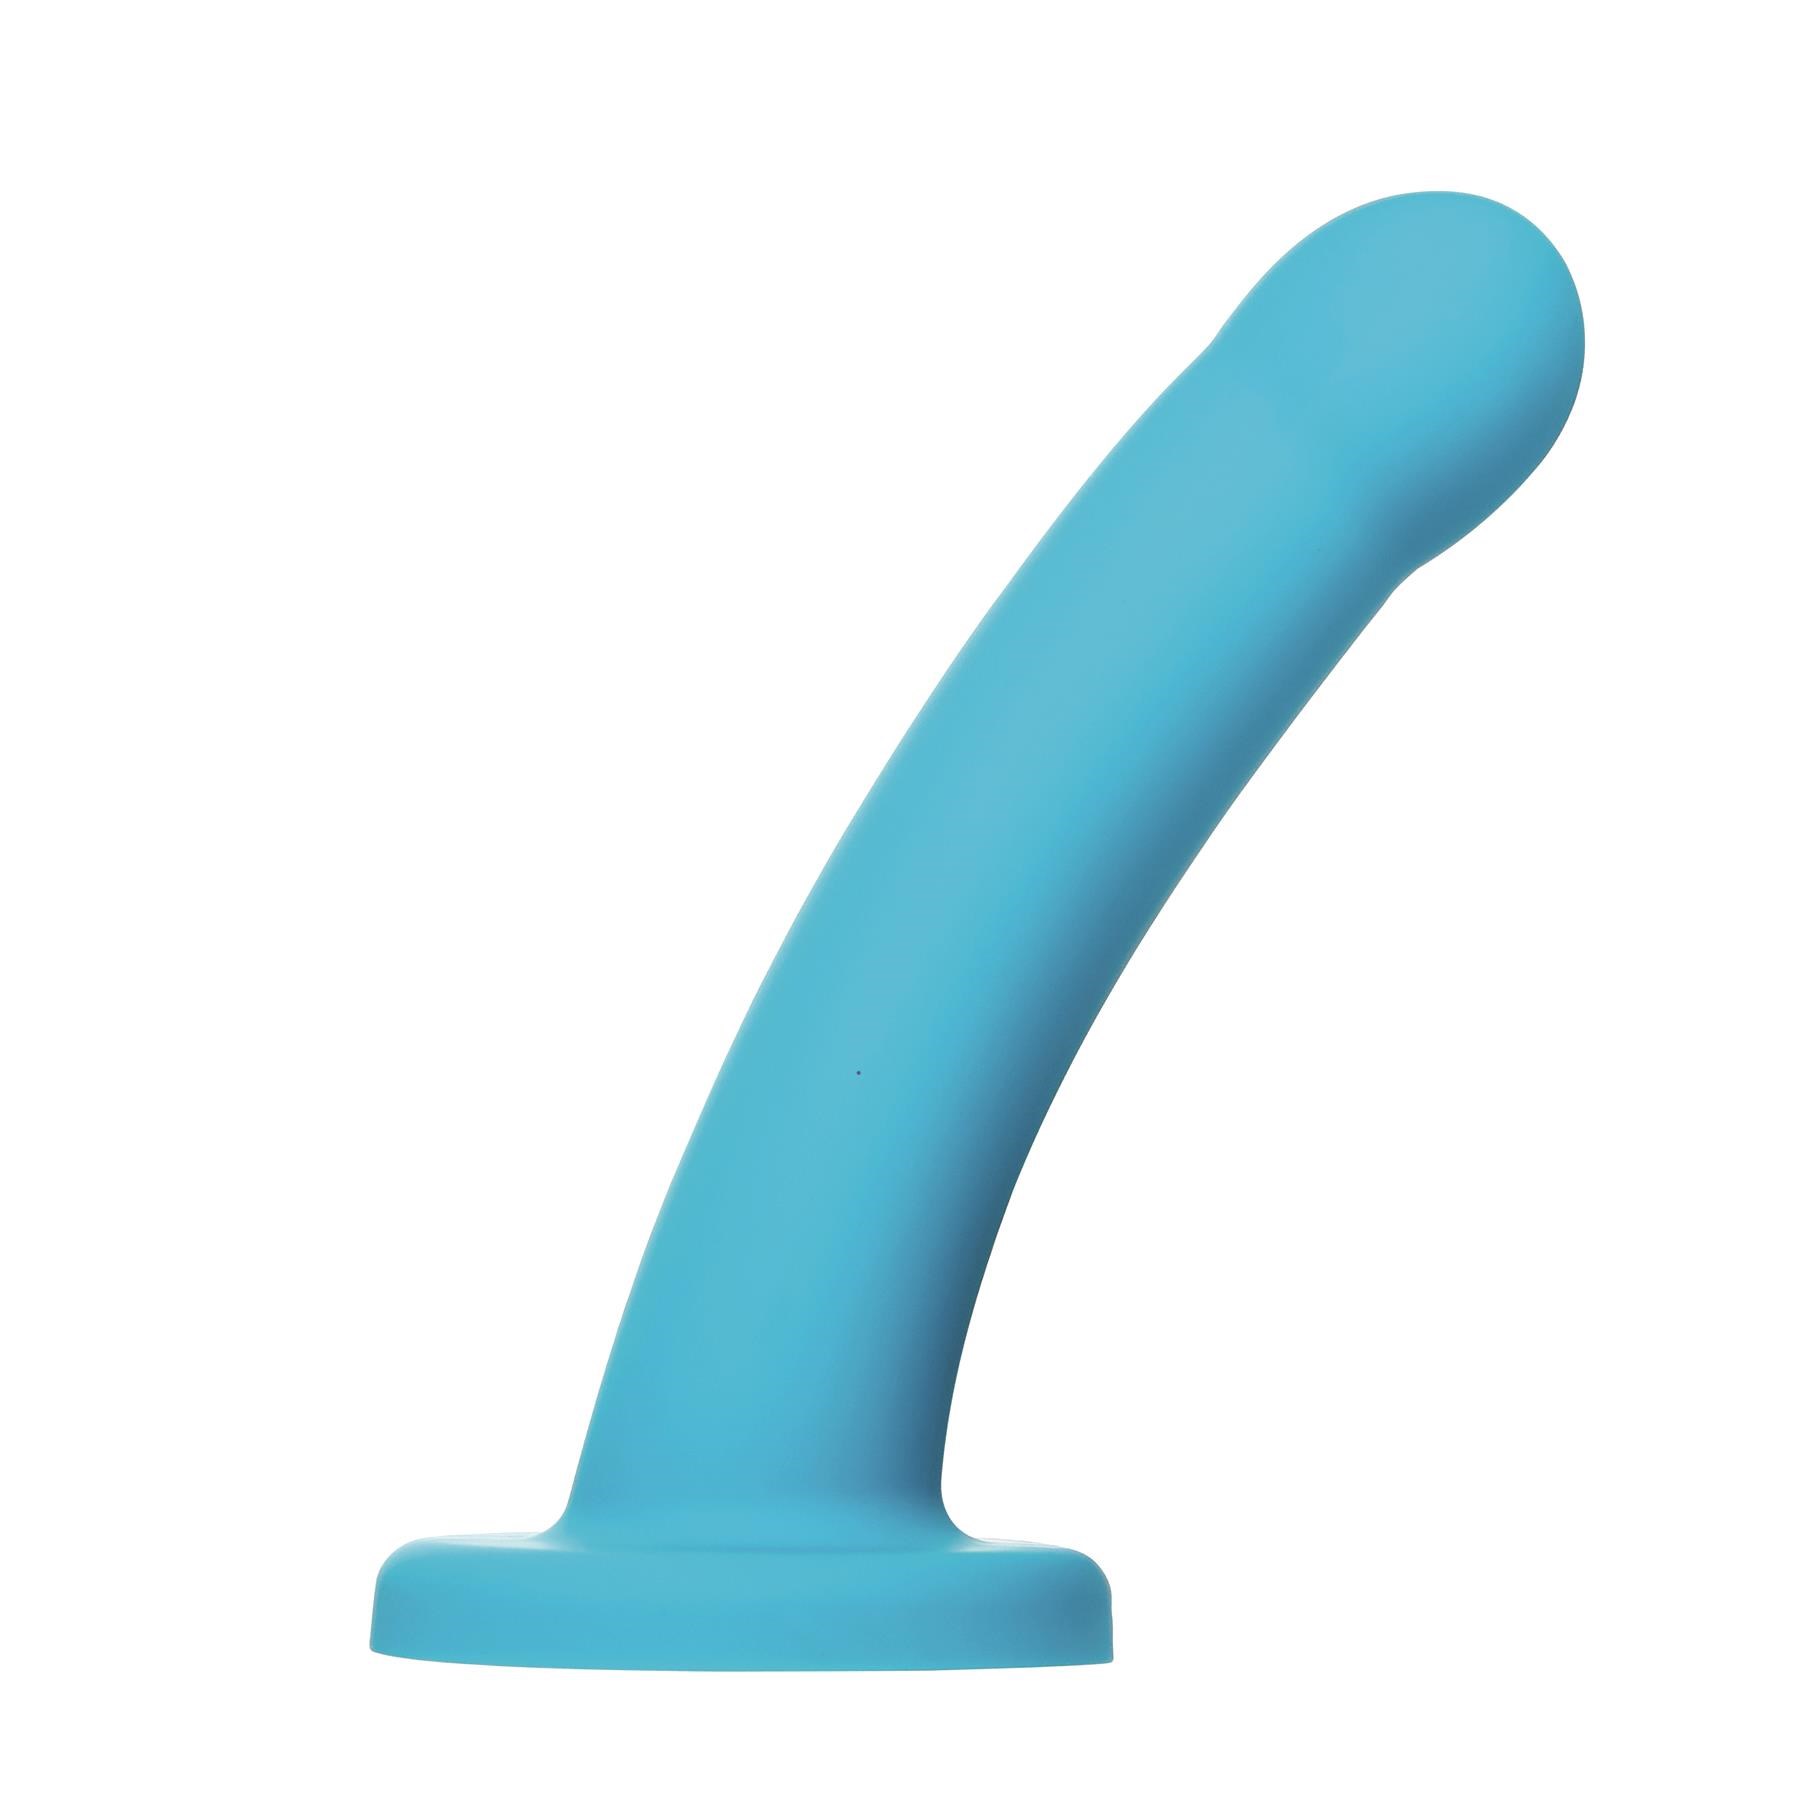 Sportsheets Nexus Collection 7" Silicone Dildo Upright Product Shot - Blue